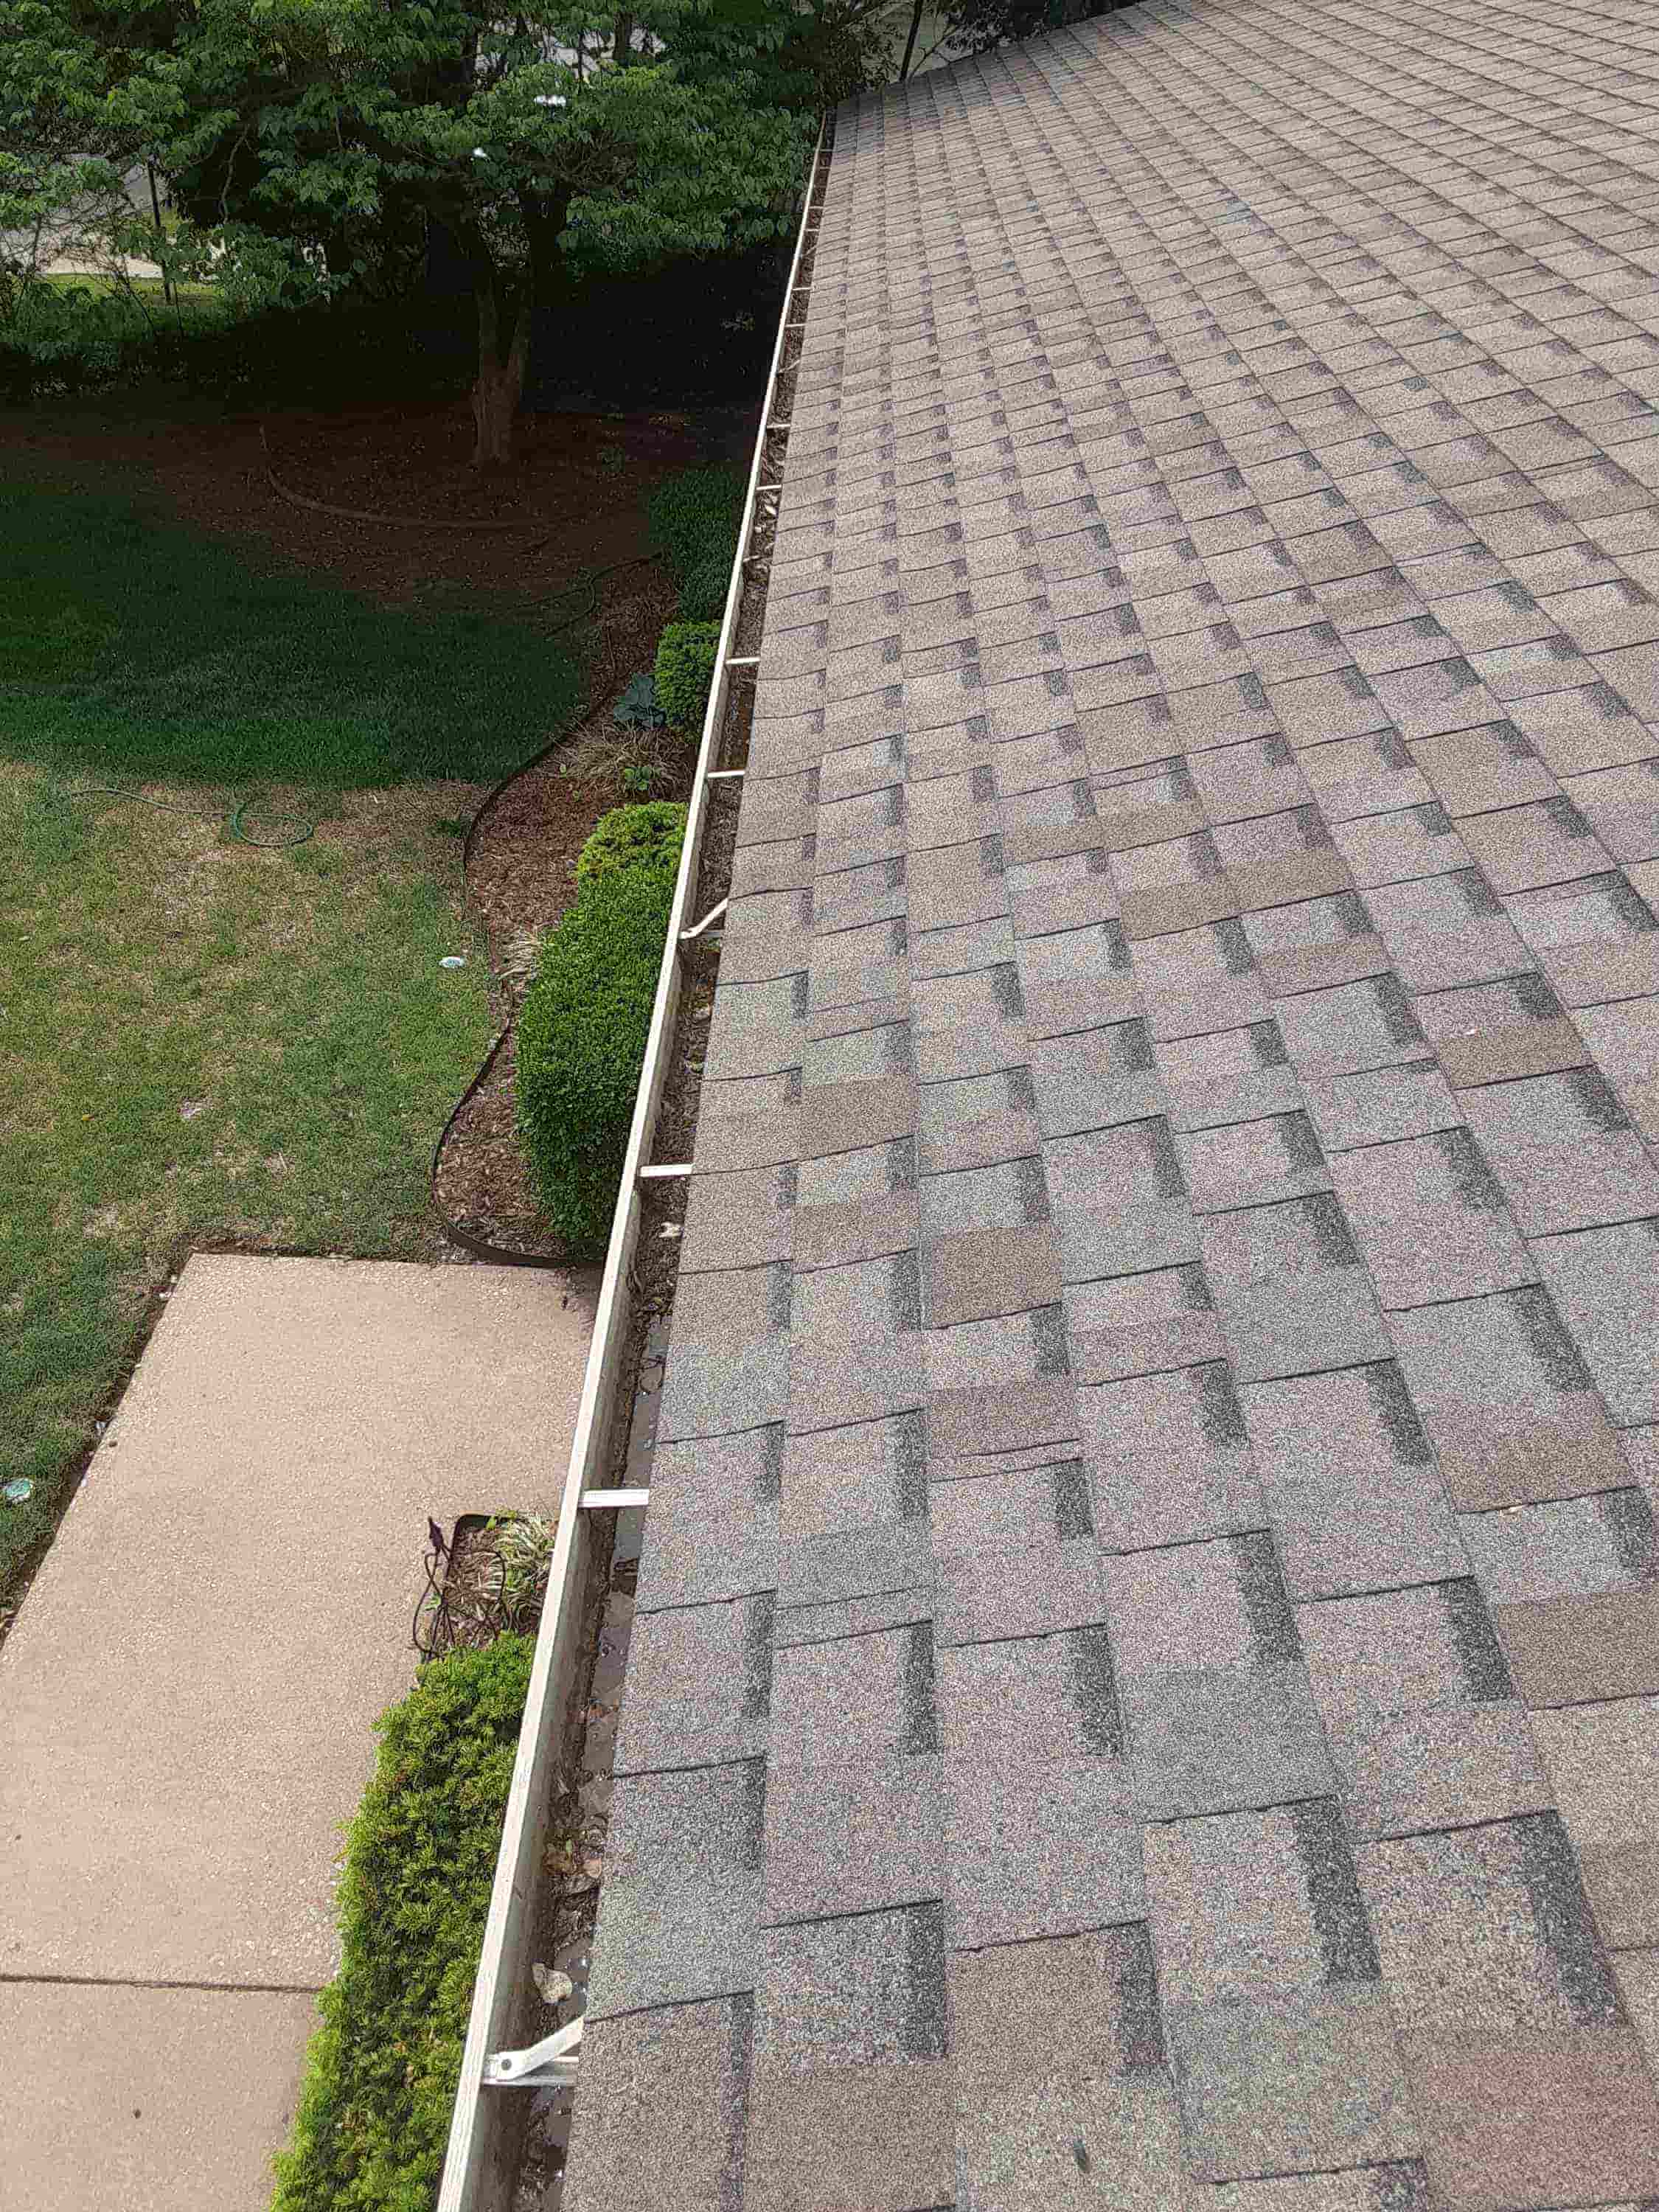 gutter cleaning cost per metre